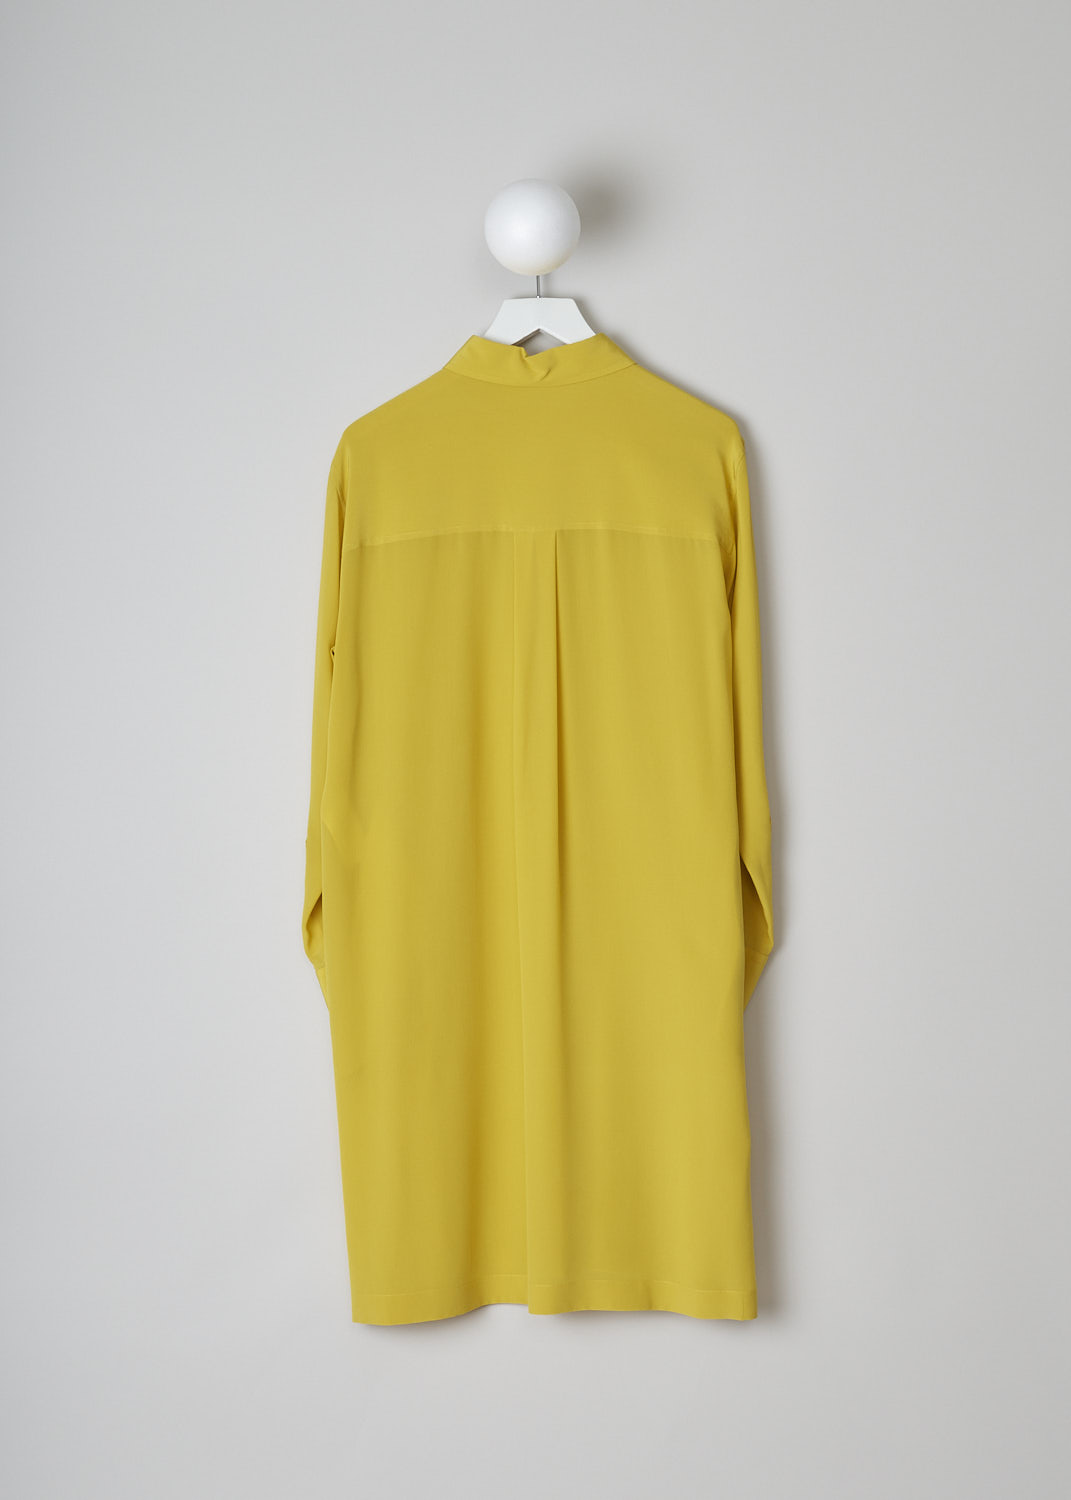 CHLOÃ‰, MUSTARD YELLOW DRESS, CHC22URO64004732_MUSTARD, Yellow, Back, This mustard yellow shirt dress has a spread collar and a front button placket with ceramic buttons that reaches about halfway down. The long sleeves have cuffs with those same ceramic buttons. Slanted pockets are concealed in the side seam. The dress has a straight hemline with side slits. In the back, the dress has a centre box pleat. 
 
